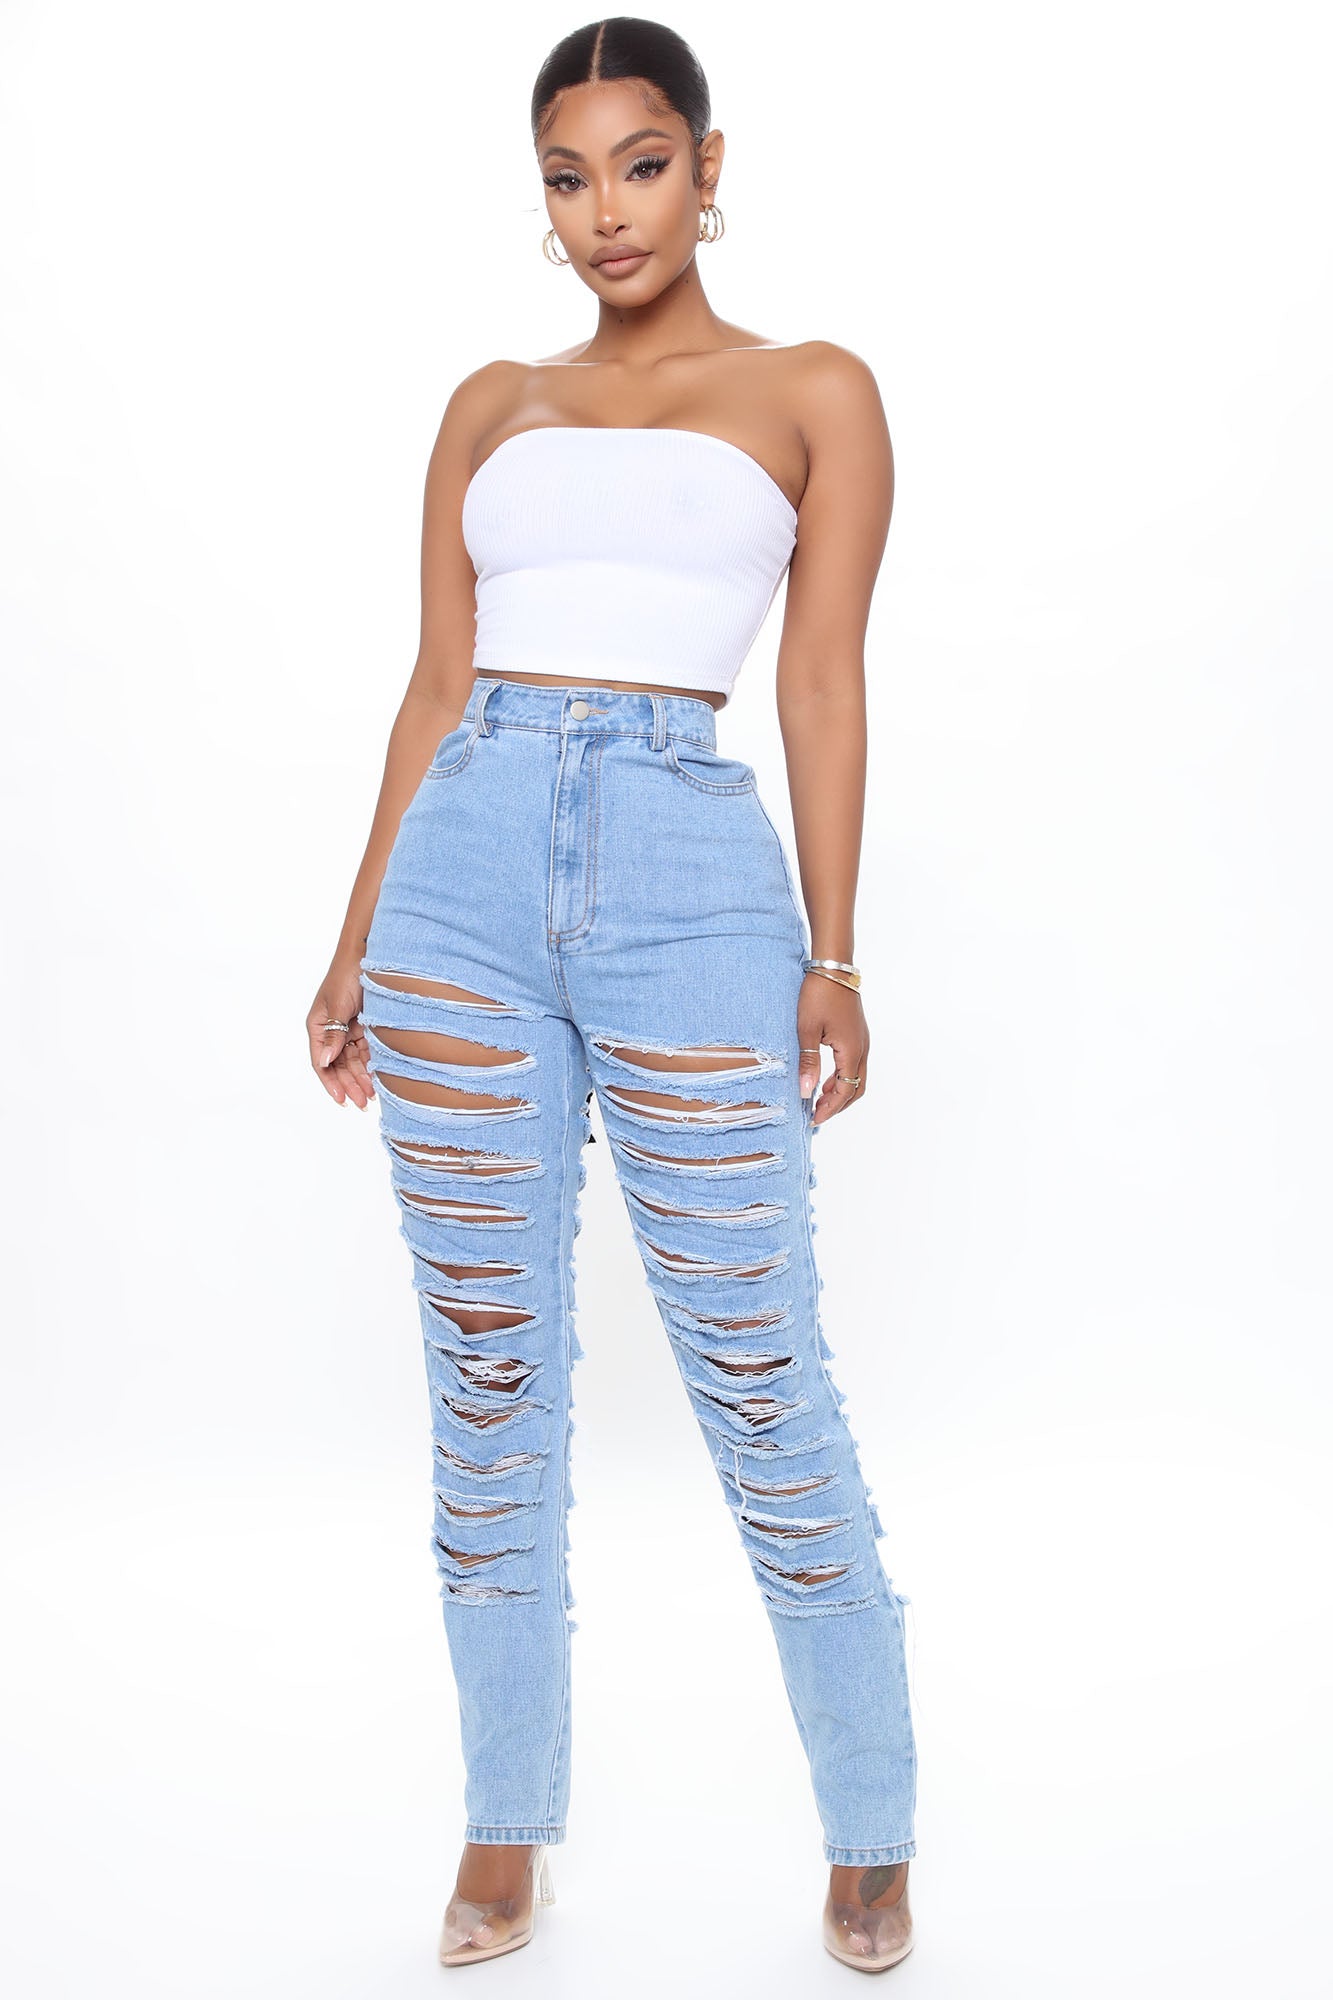 Mixed Signals Ripped Baggy Jeans - Pink